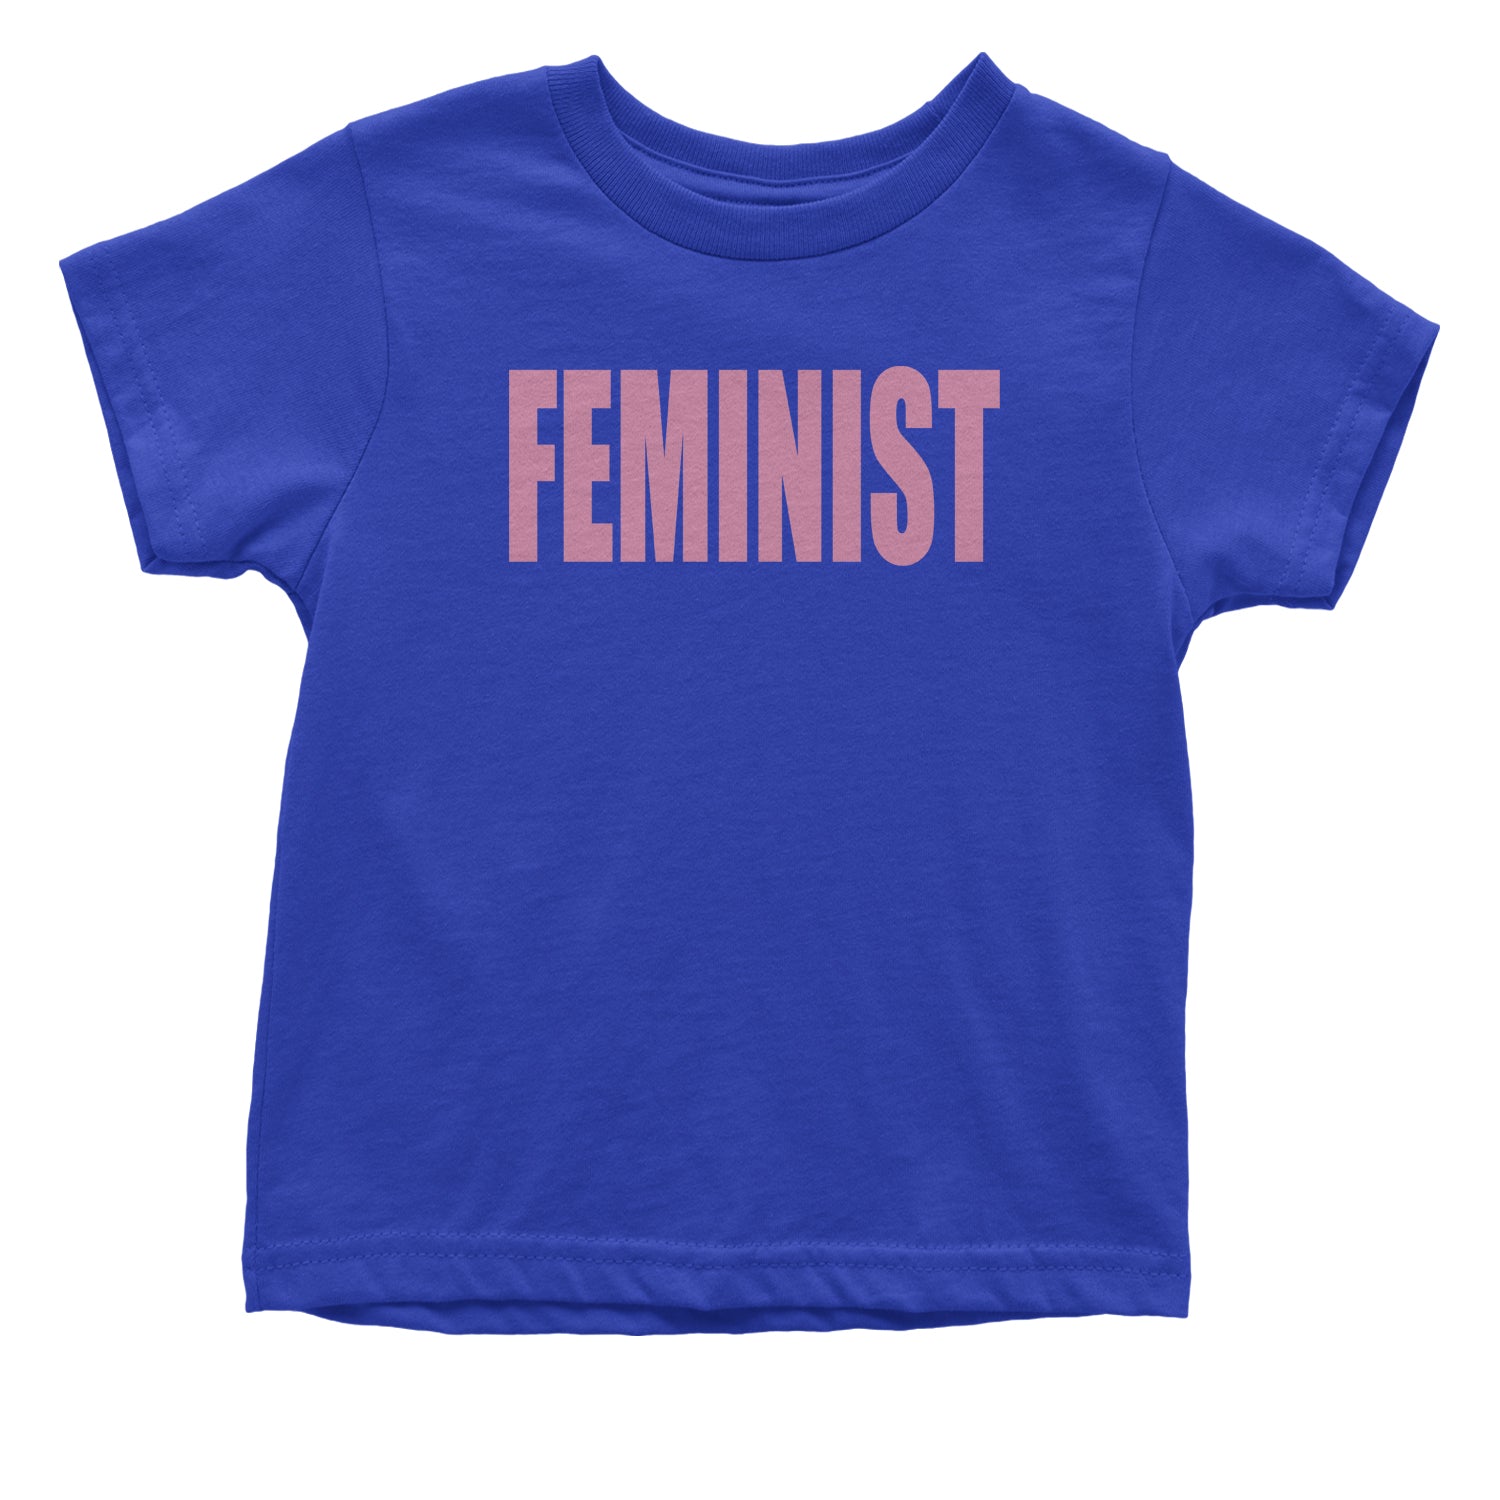 Feminist (Pink Print) Infant One-Piece Romper Bodysuit and Toddler T-shirt a, equal, equality, feminism, feminist, gender, is, lgbtq, like, looks, nevertheless, pay, persisted, rights, she, this, what by Expression Tees